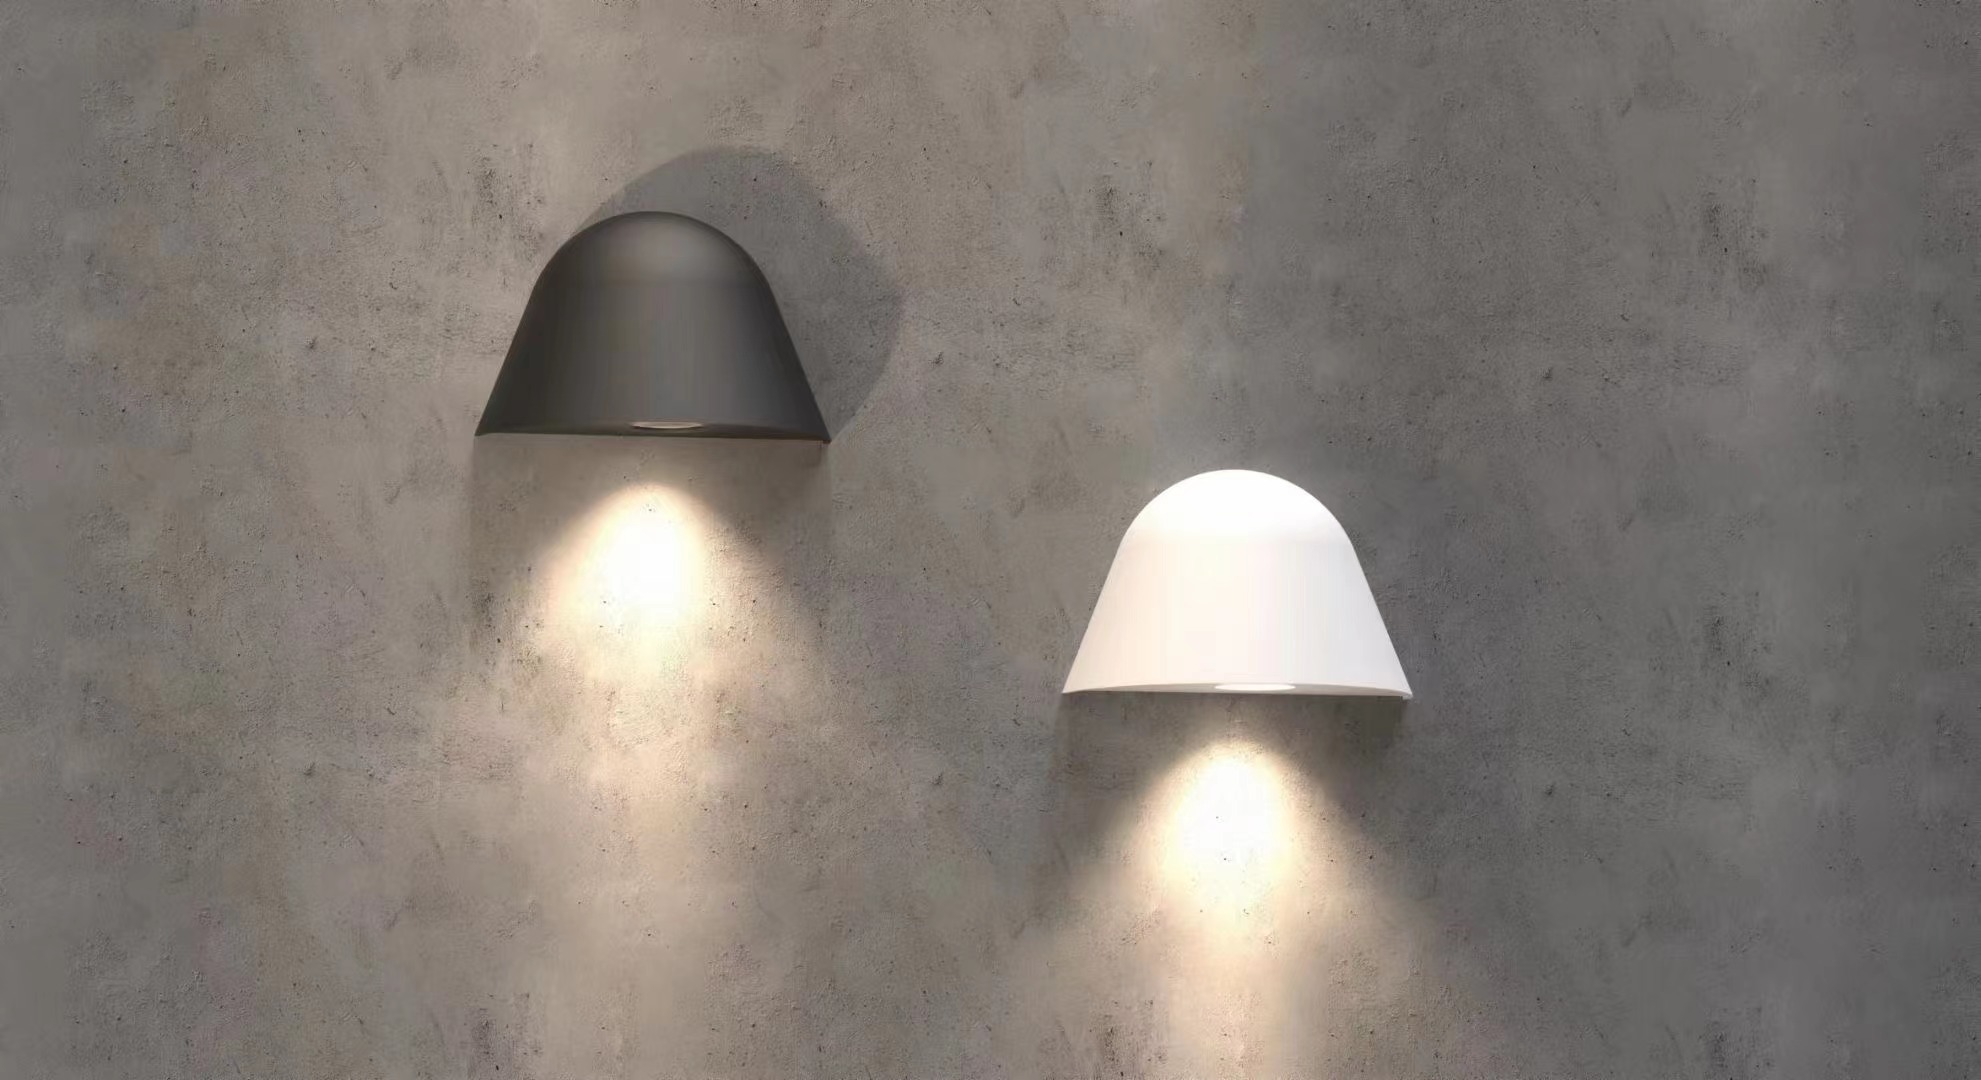 Illuminating Spaces with LED Wall Sconces